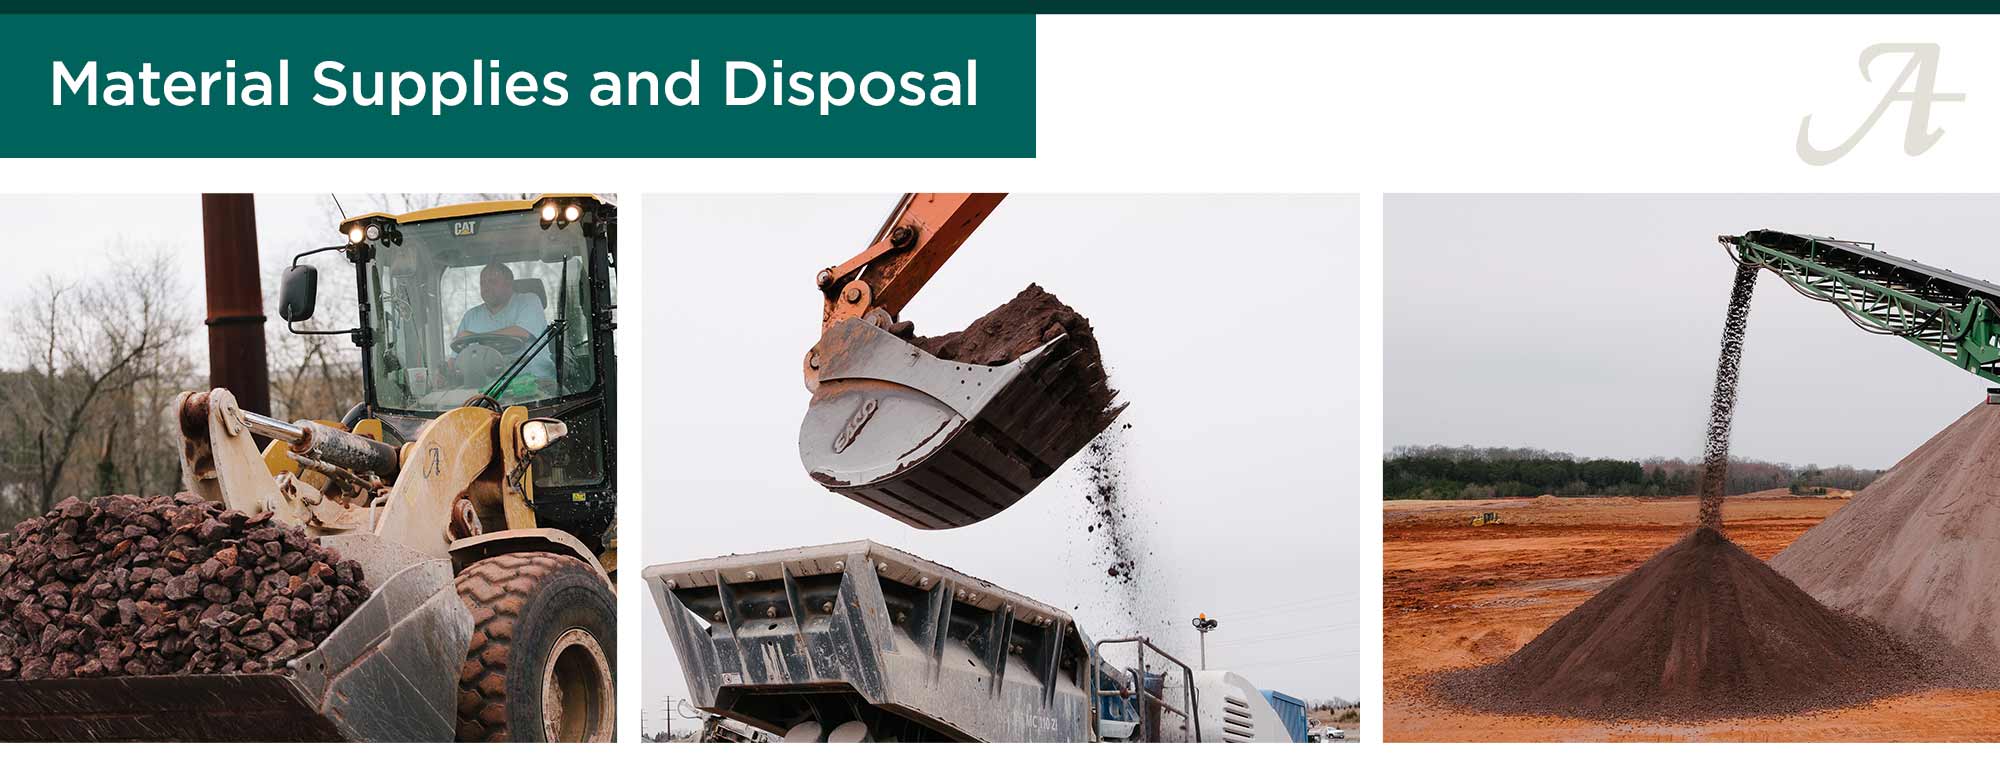 The Anderson Company Materials Supply and Disposal